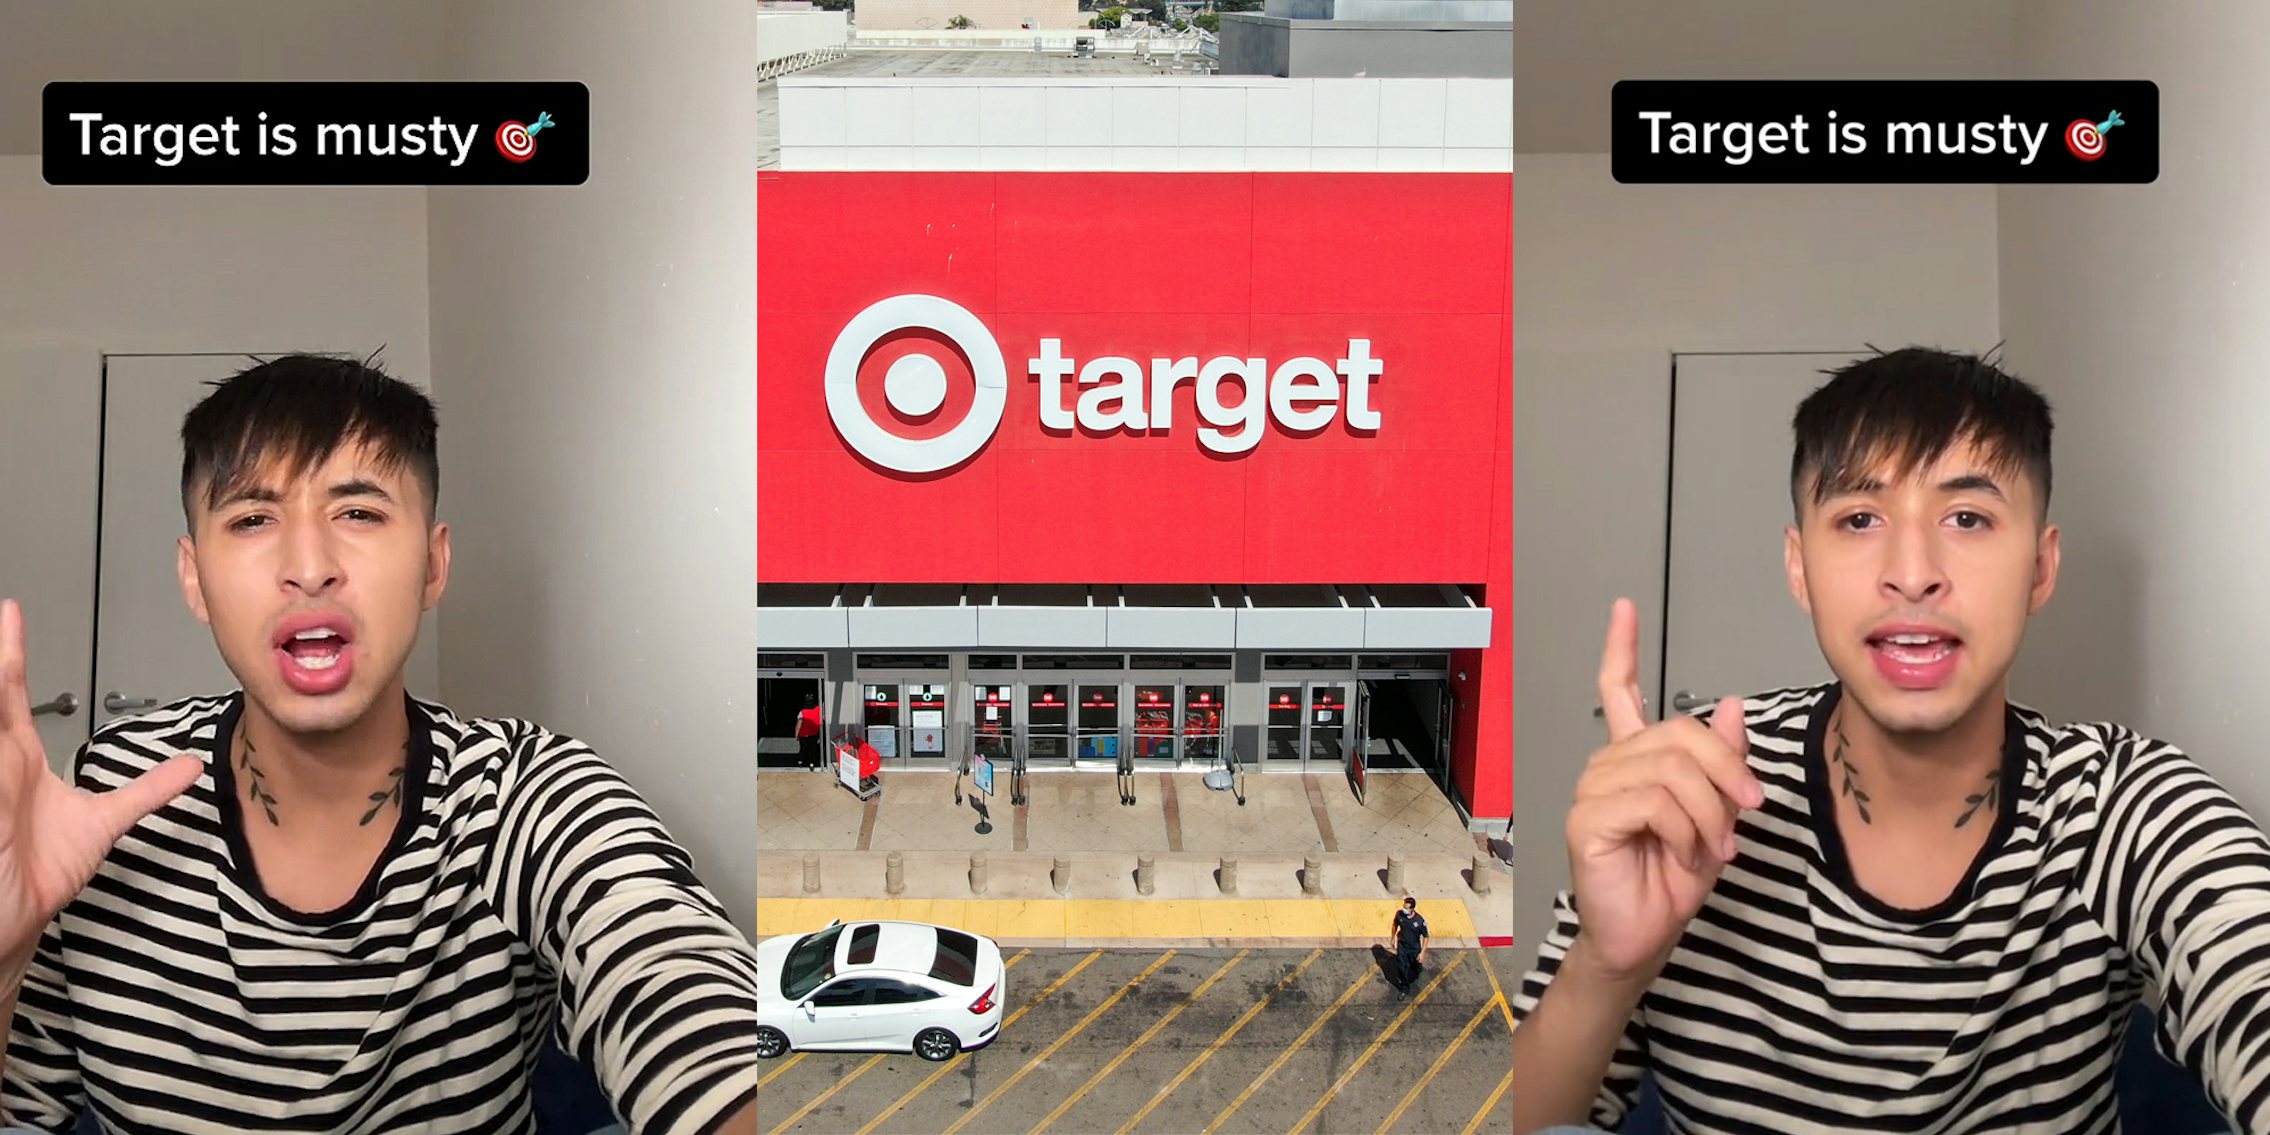 Man speaking in front of white walls with hand up caption 'Target is musty' (l) Target store with sign and parking lot (c) man speaking in front of white walls with finger up caption 'Target is musty' (r)